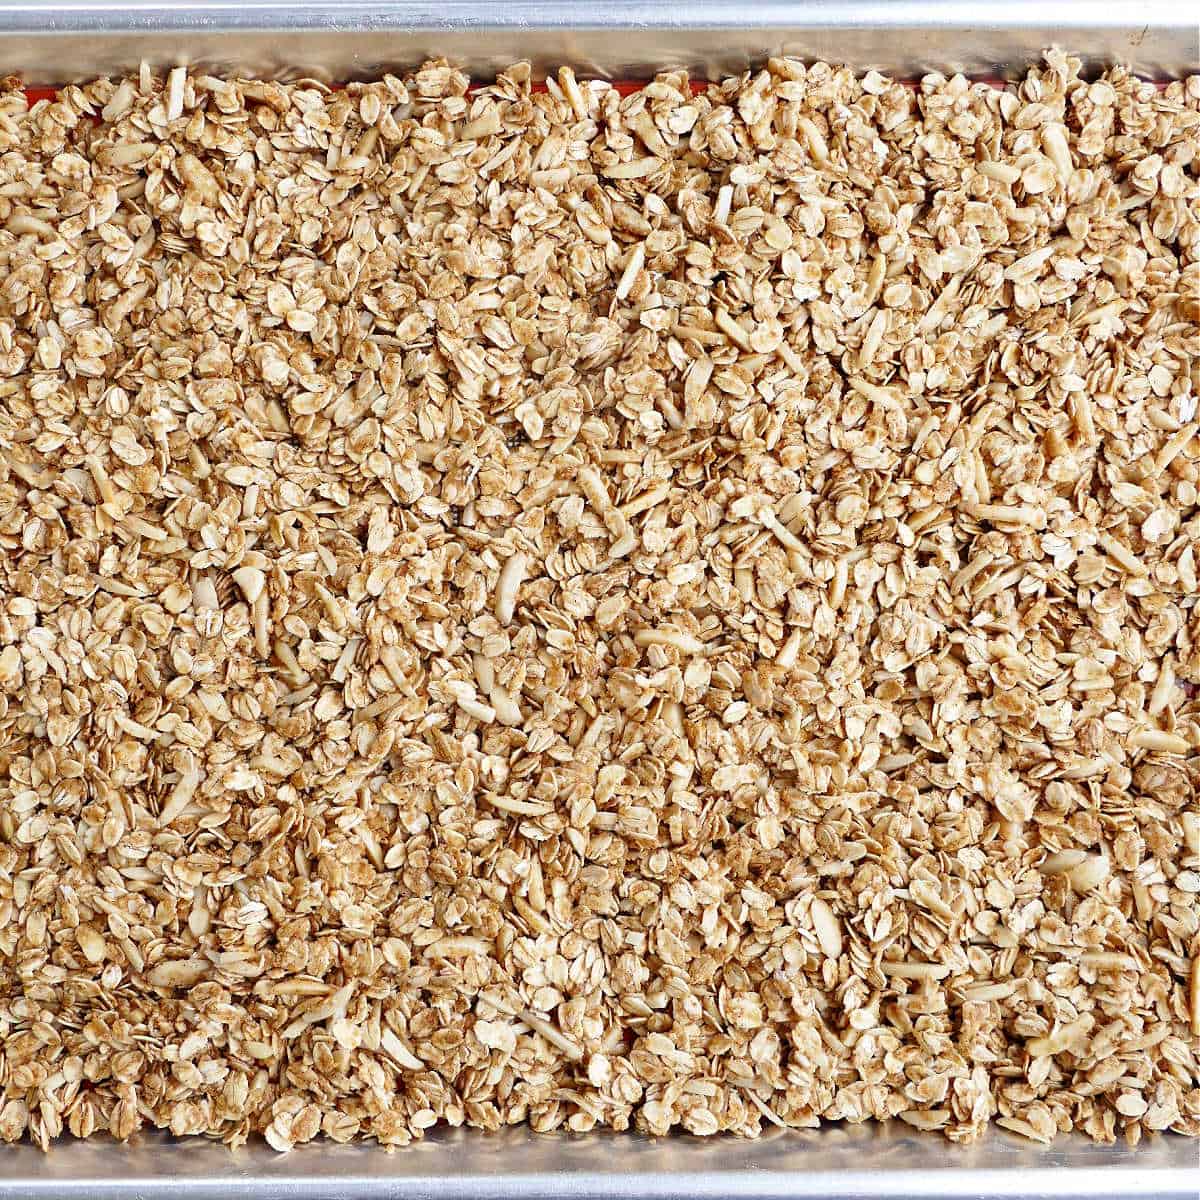 almond granola spread out on a lined baking dish before going into the oven